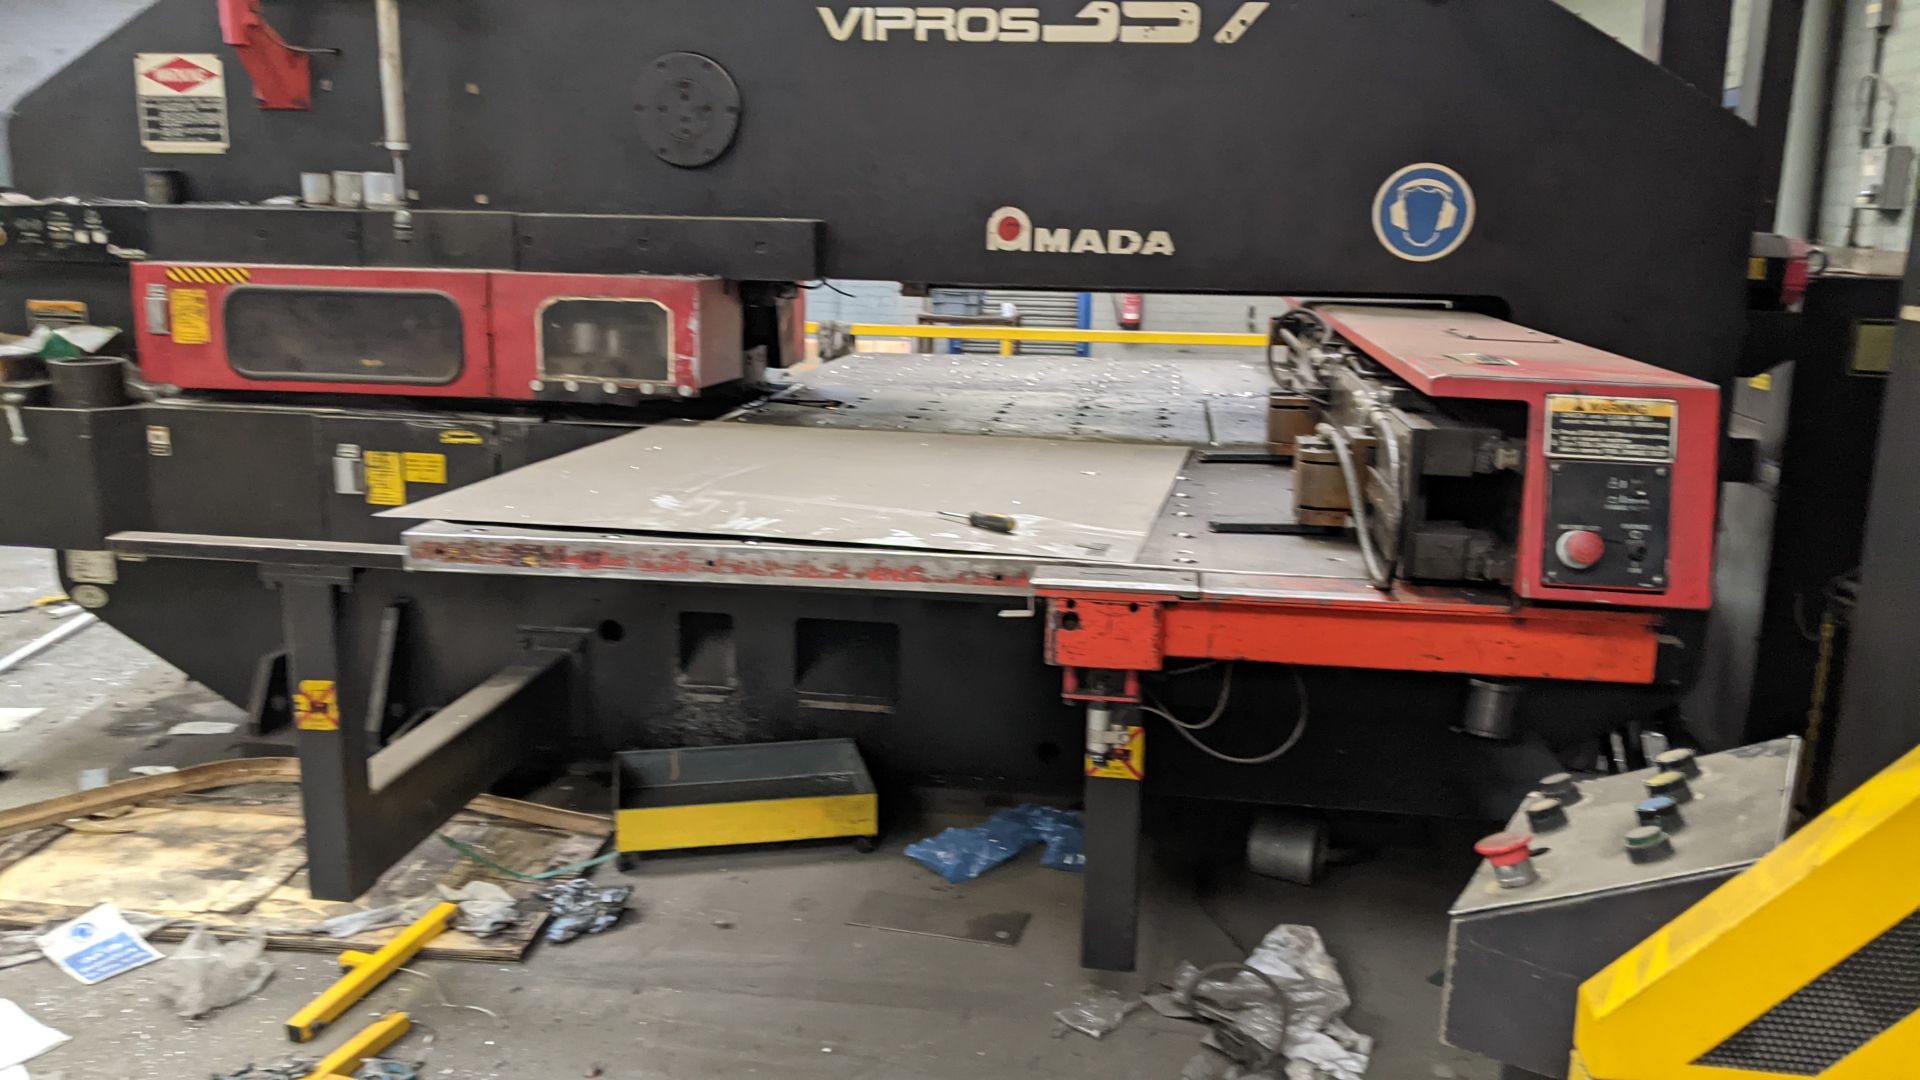 1995 Amada Vipros 357 NC turret punch press, 45 turret stations, 30 ton capacity, serial number 3571 - Image 51 of 51